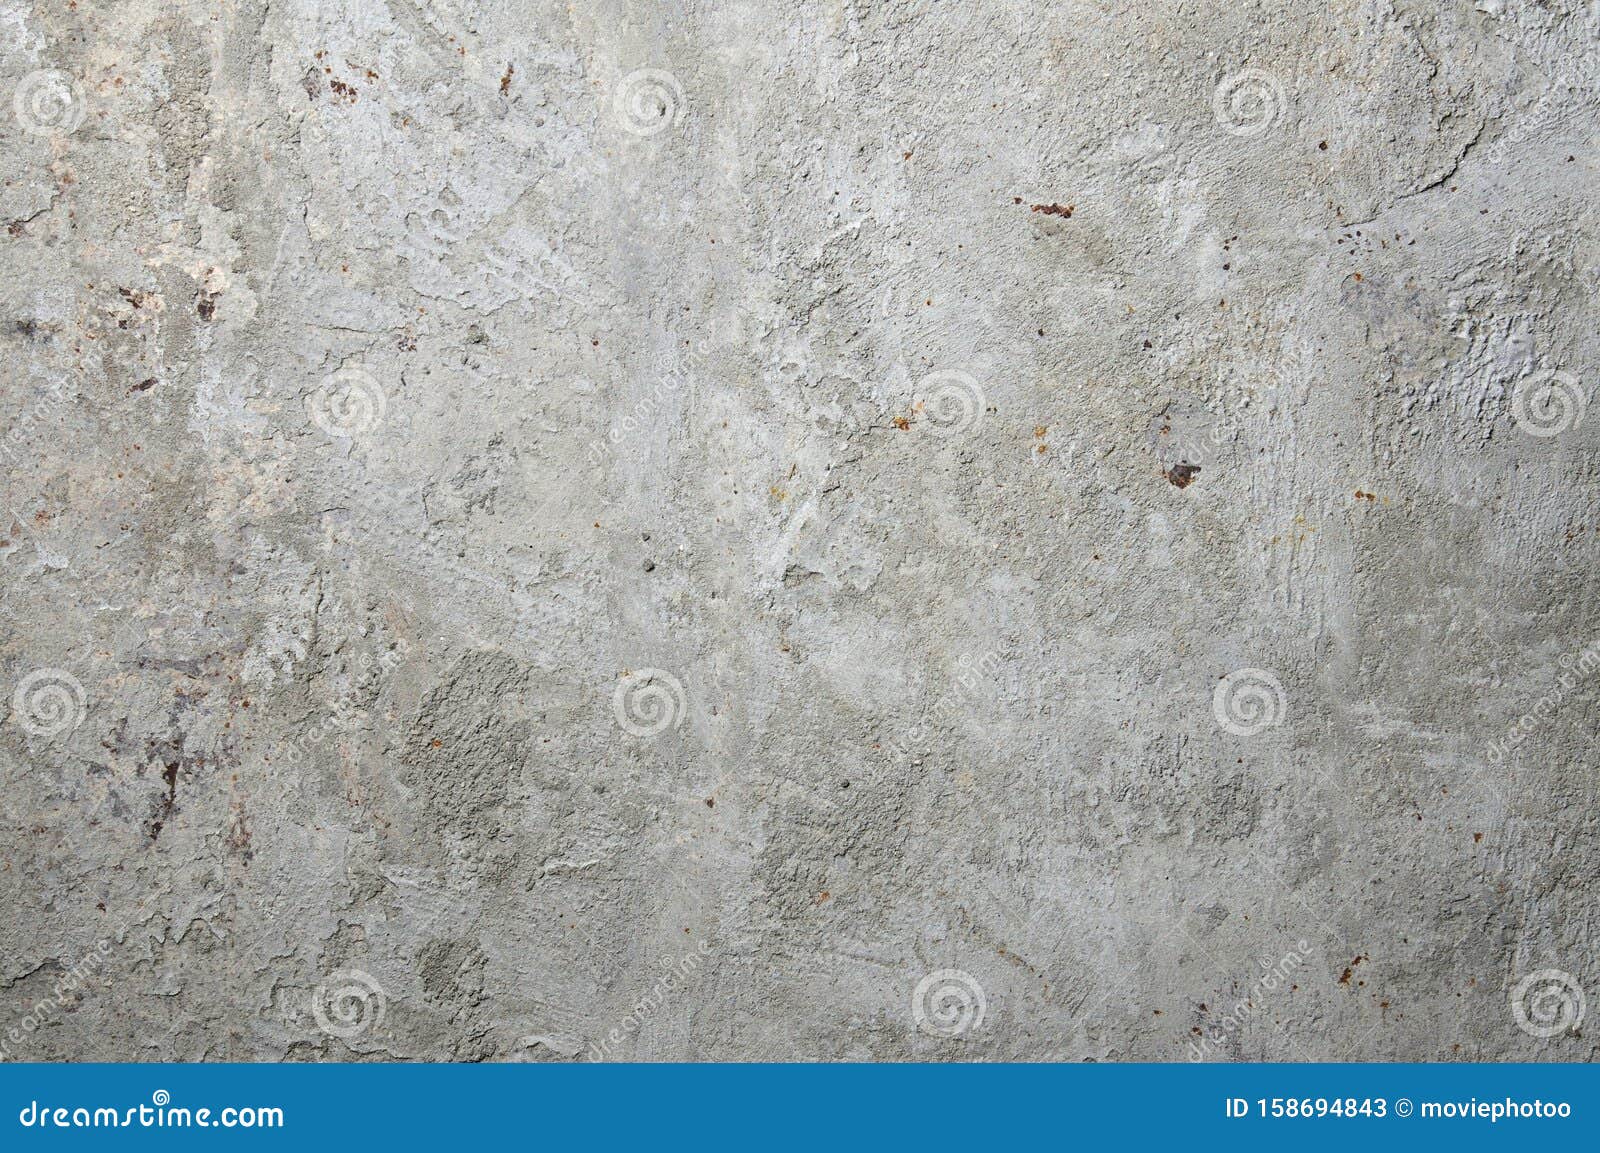 Cement on Rusty Metal for Background Stock Image - Image of square